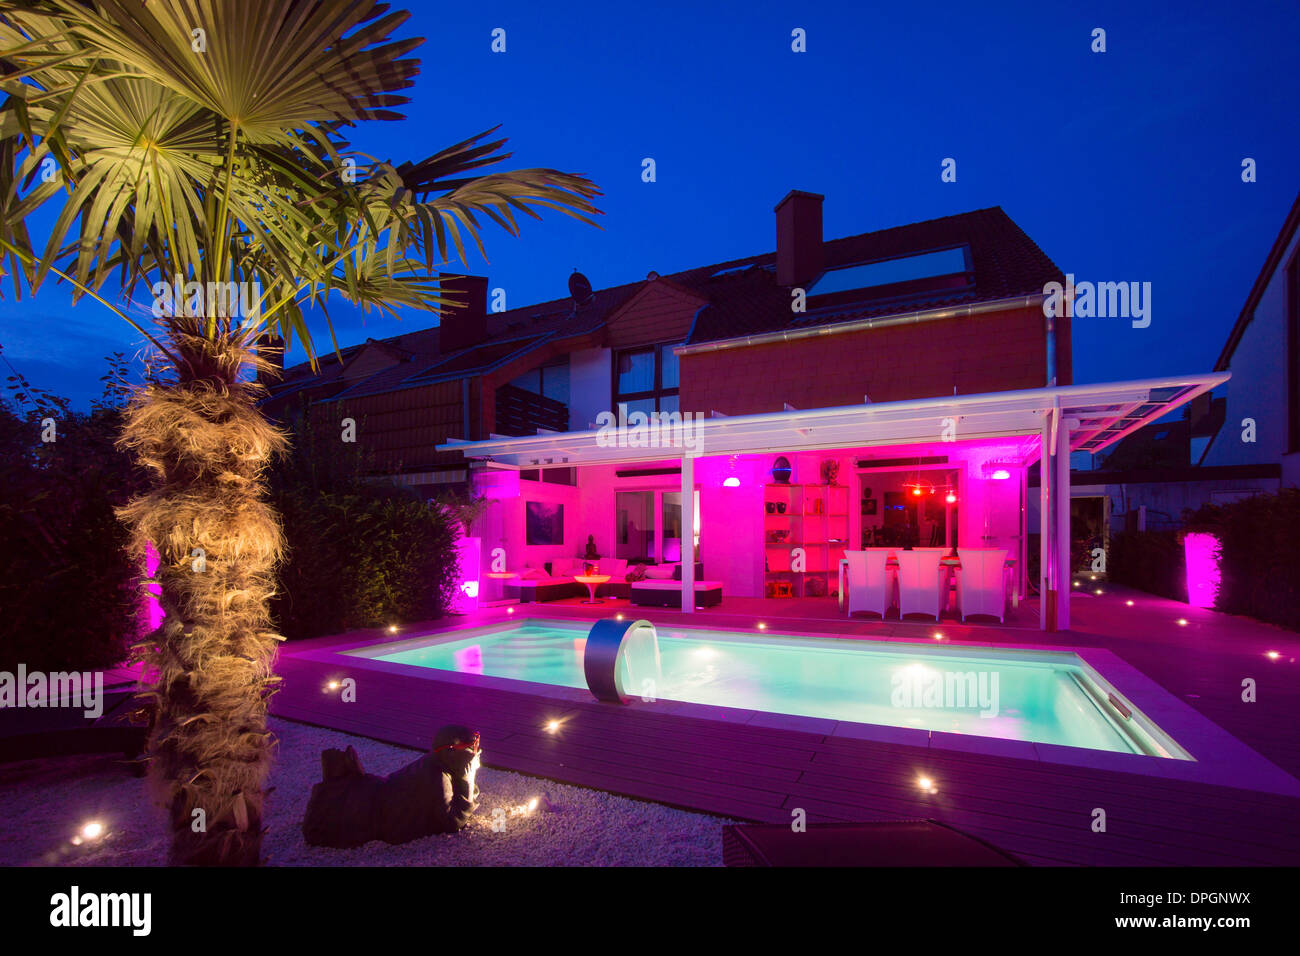 Private terraced house with garden, winter garden, pool, terrace and palm with show lighting at night in summer, Germany, Europe - August 2013 Stock Photo